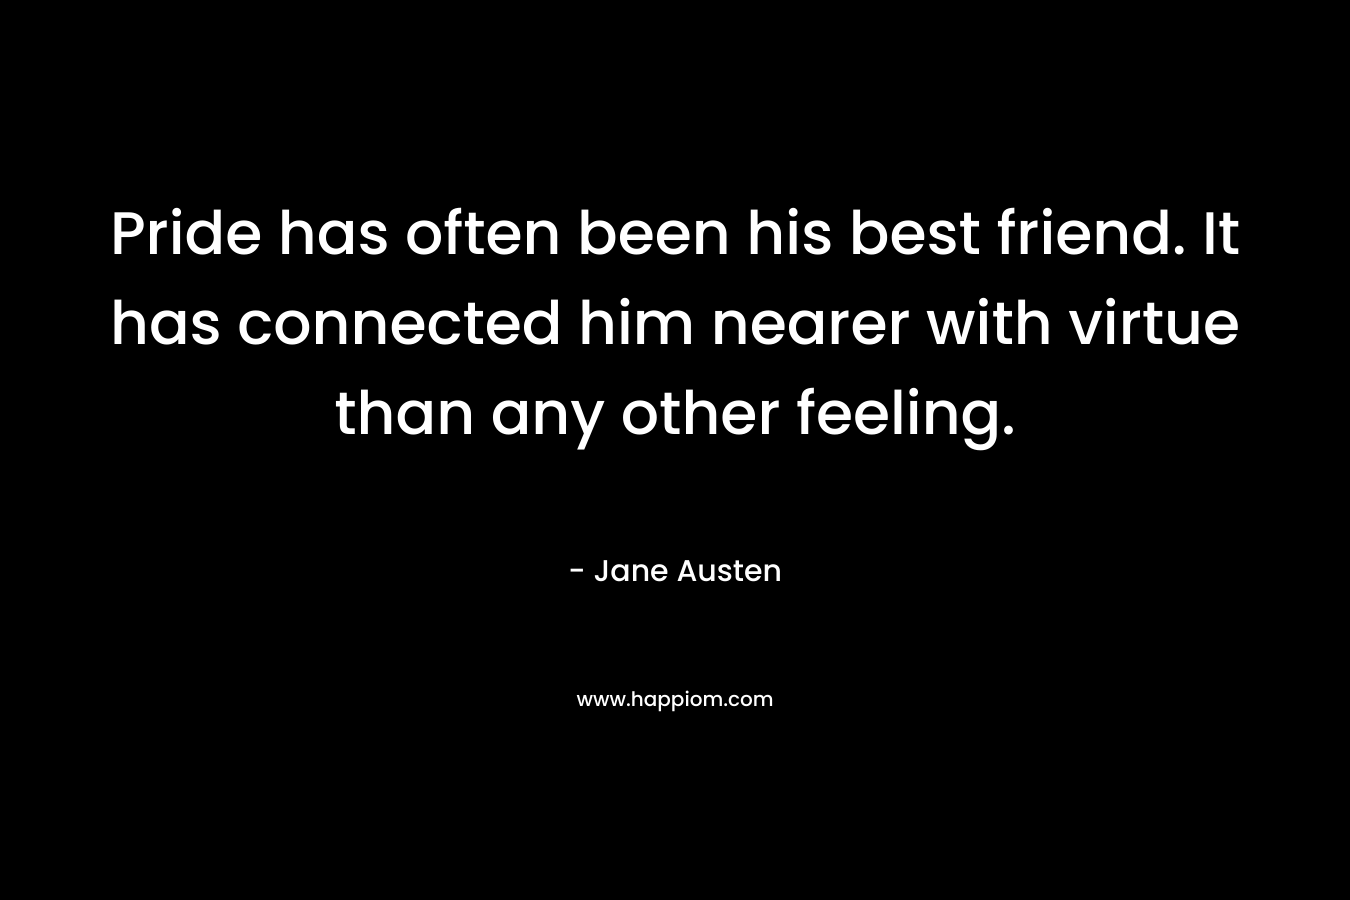 Pride has often been his best friend. It has connected him nearer with virtue than any other feeling. – Jane Austen